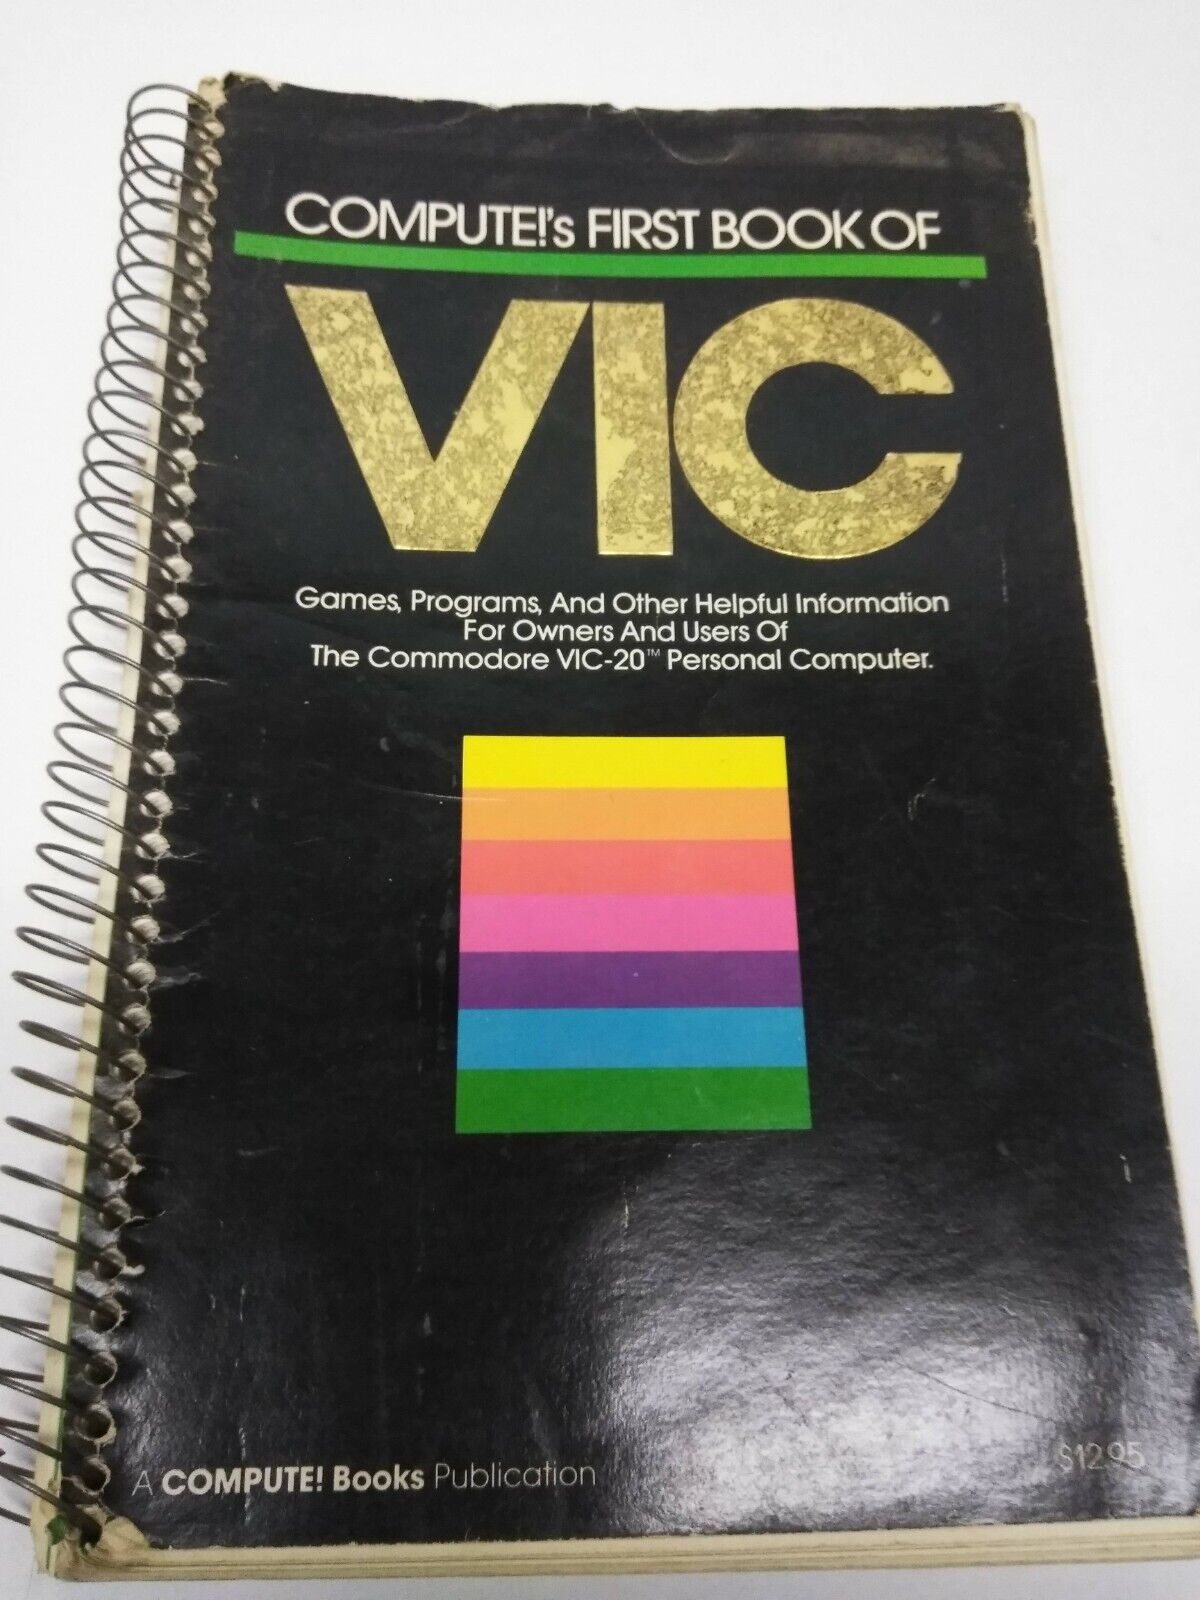 VINTAGE 1982 Computes First Book of Commodore Vic-20 Trade Paperback